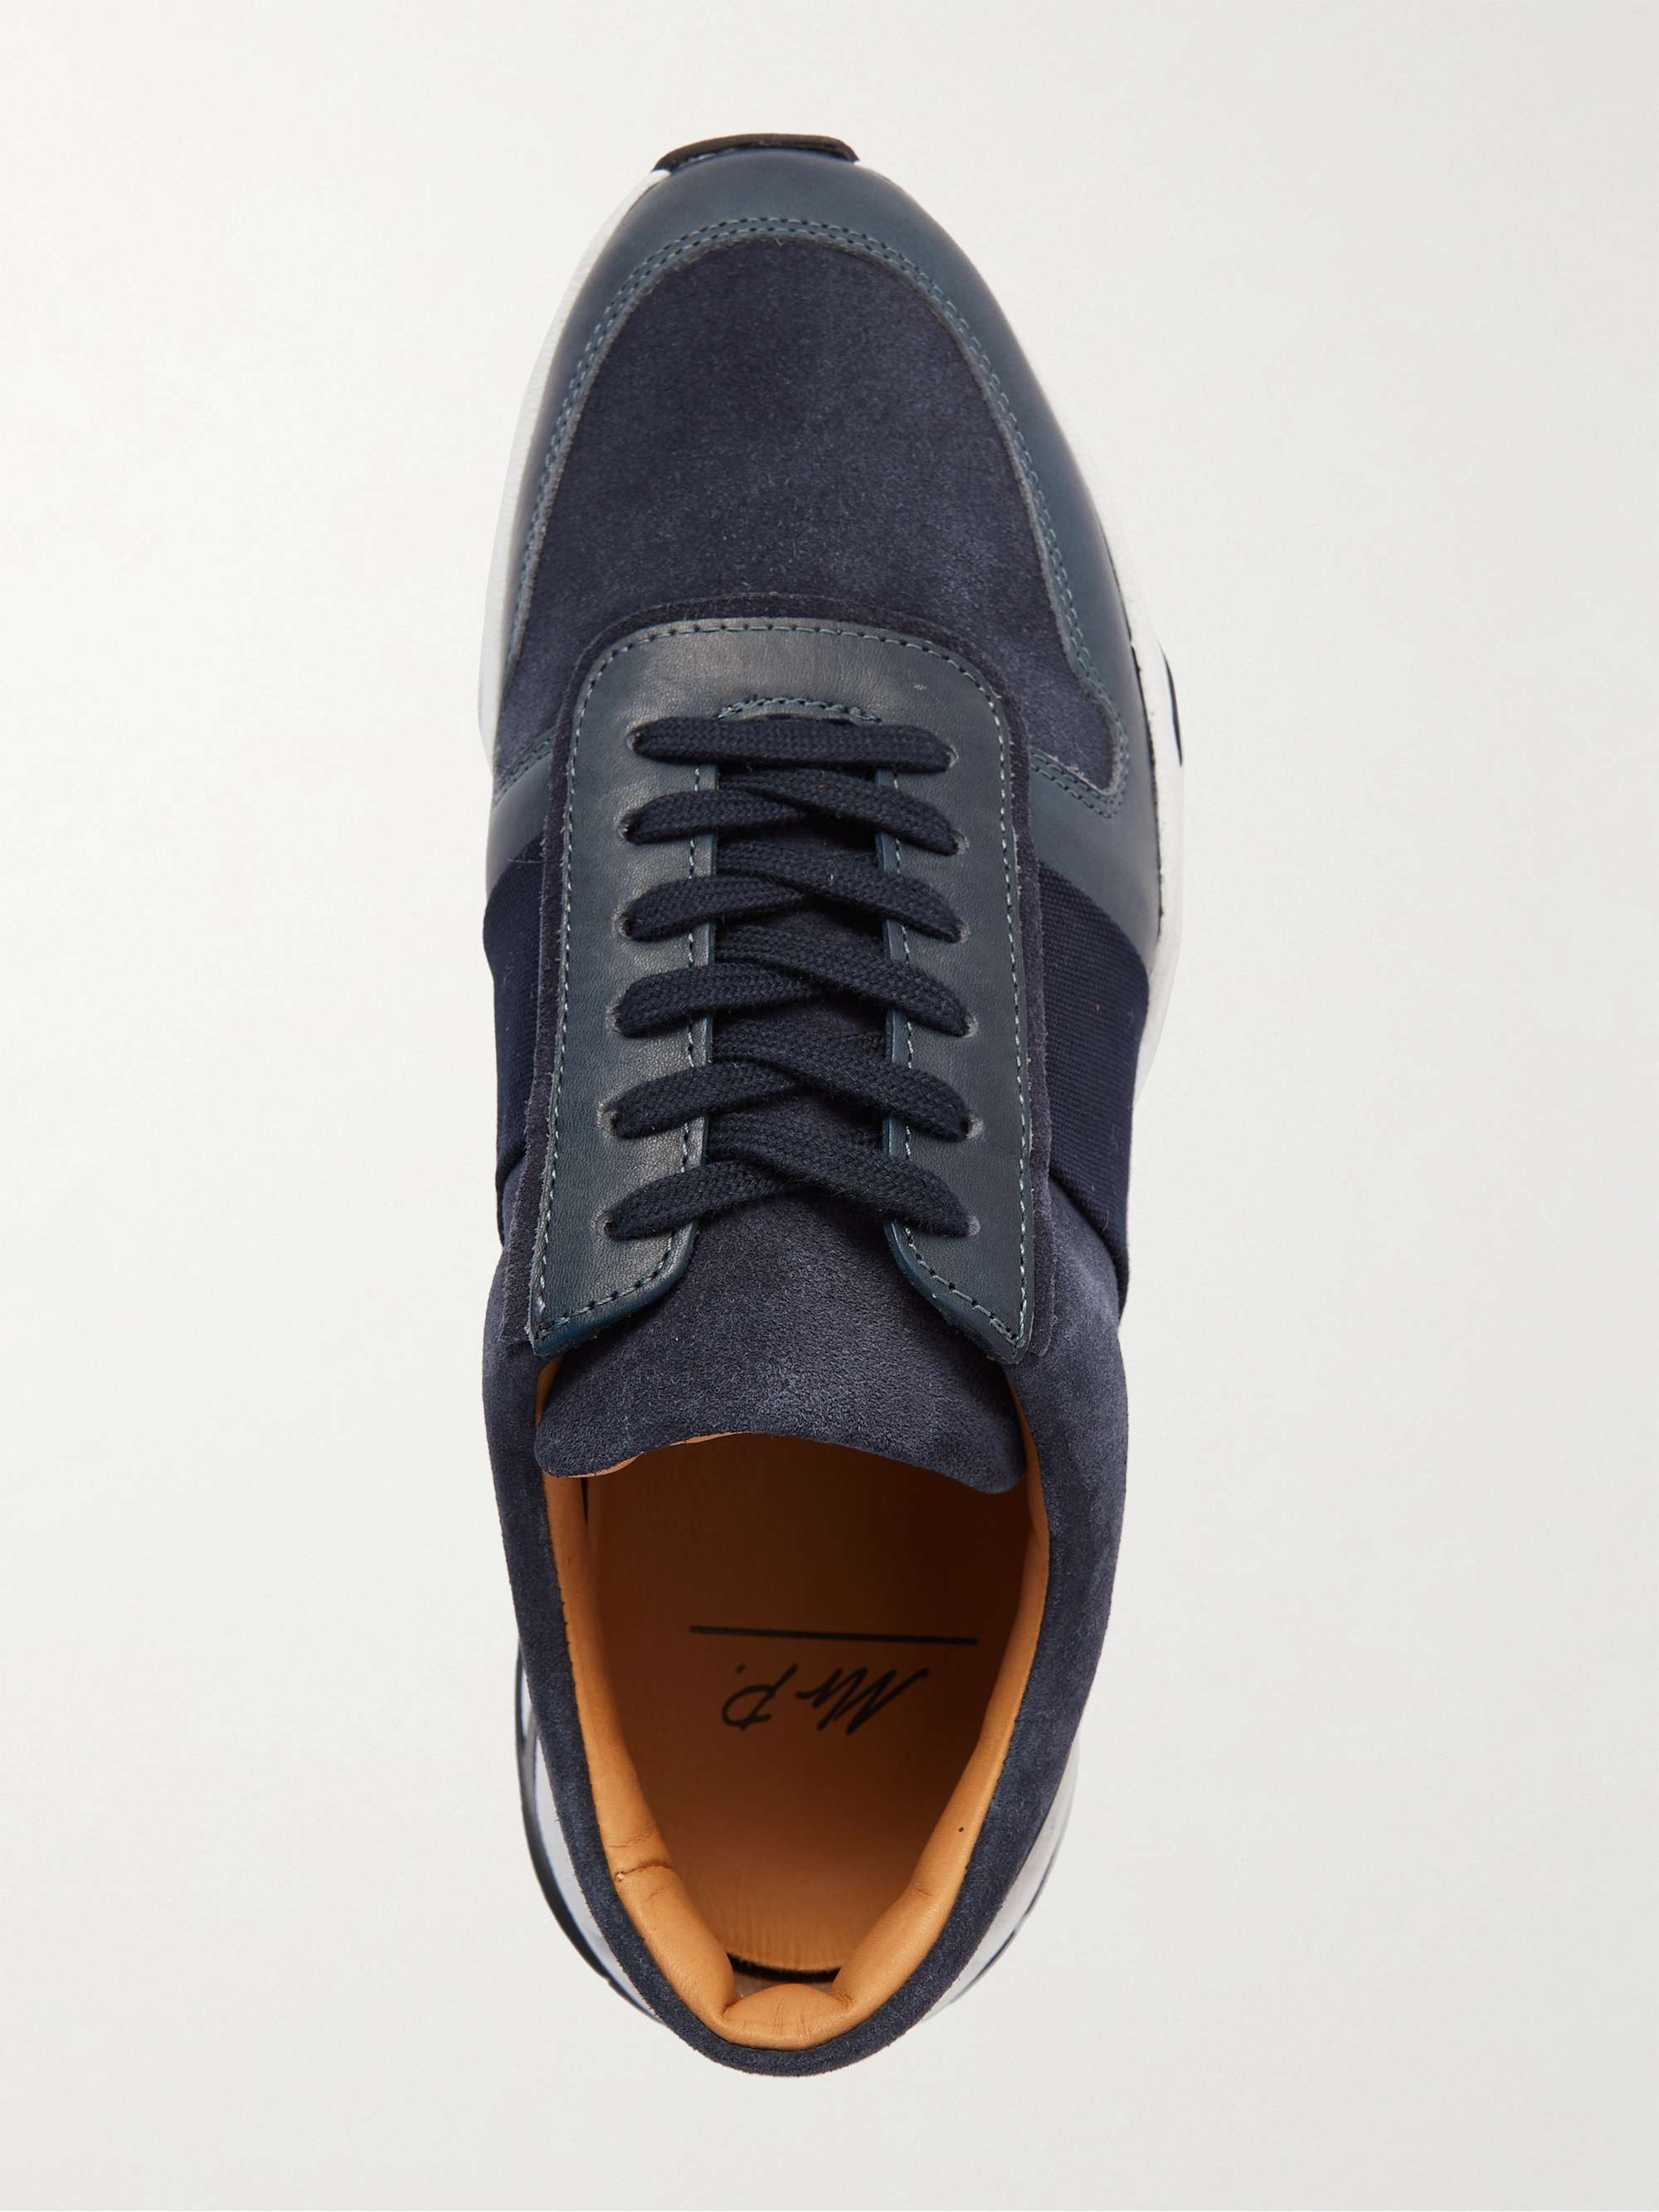 MR P. Mesh and Leather-Trimmed Regenerated Suede by evolo® Sneakers